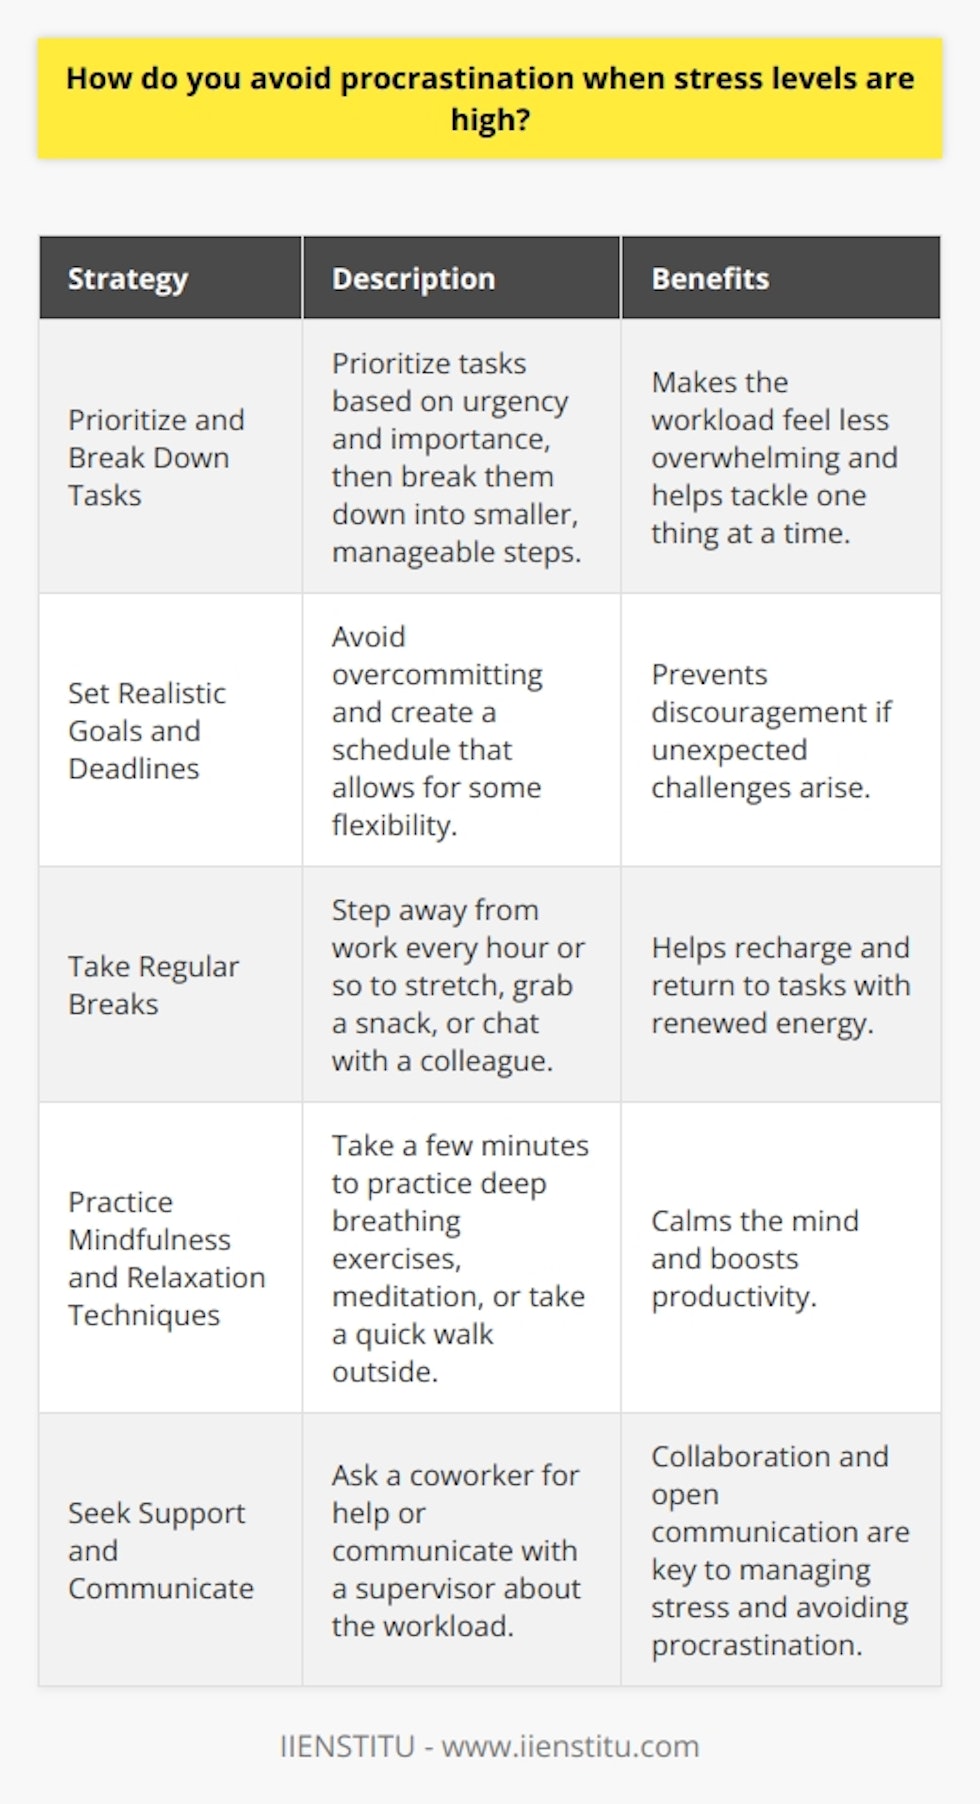 When stress levels are high, its easy to fall into the trap of procrastination. However, over the years, Ive developed some strategies to stay focused and productive even during the most challenging times. Prioritize and Break Down Tasks I start by prioritizing my tasks based on urgency and importance. Then, I break them down into smaller, manageable steps. This approach makes the workload feel less overwhelming and helps me tackle one thing at a time. Set Realistic Goals and Deadlines Setting realistic goals and deadlines is crucial. I avoid overcommitting myself and create a schedule that allows for some flexibility. This way, I dont feel discouraged if unexpected challenges arise. Take Regular Breaks Taking regular breaks is essential for maintaining focus and reducing stress. I step away from my desk every hour or so to stretch, grab a snack, or chat with a colleague. These short breaks help me recharge and return to my tasks with renewed energy. Practice Mindfulness and Relaxation Techniques When stress levels are particularly high, I take a few minutes to practice mindfulness or relaxation techniques. Deep breathing exercises, meditation, or even a quick walk outside can work wonders for calming my mind and boosting my productivity. Seek Support and Communicate Finally, I dont hesitate to seek support when needed. Whether its asking a coworker for help or communicating with my supervisor about my workload, Ive learned that collaboration and open communication are key to managing stress and avoiding procrastination. By implementing these strategies consistently, Ive been able to stay on top of my work even during the most stressful periods. Its an ongoing process, but with practice and self-awareness, anyone can overcome the urge to procrastinate and thrive under pressure.